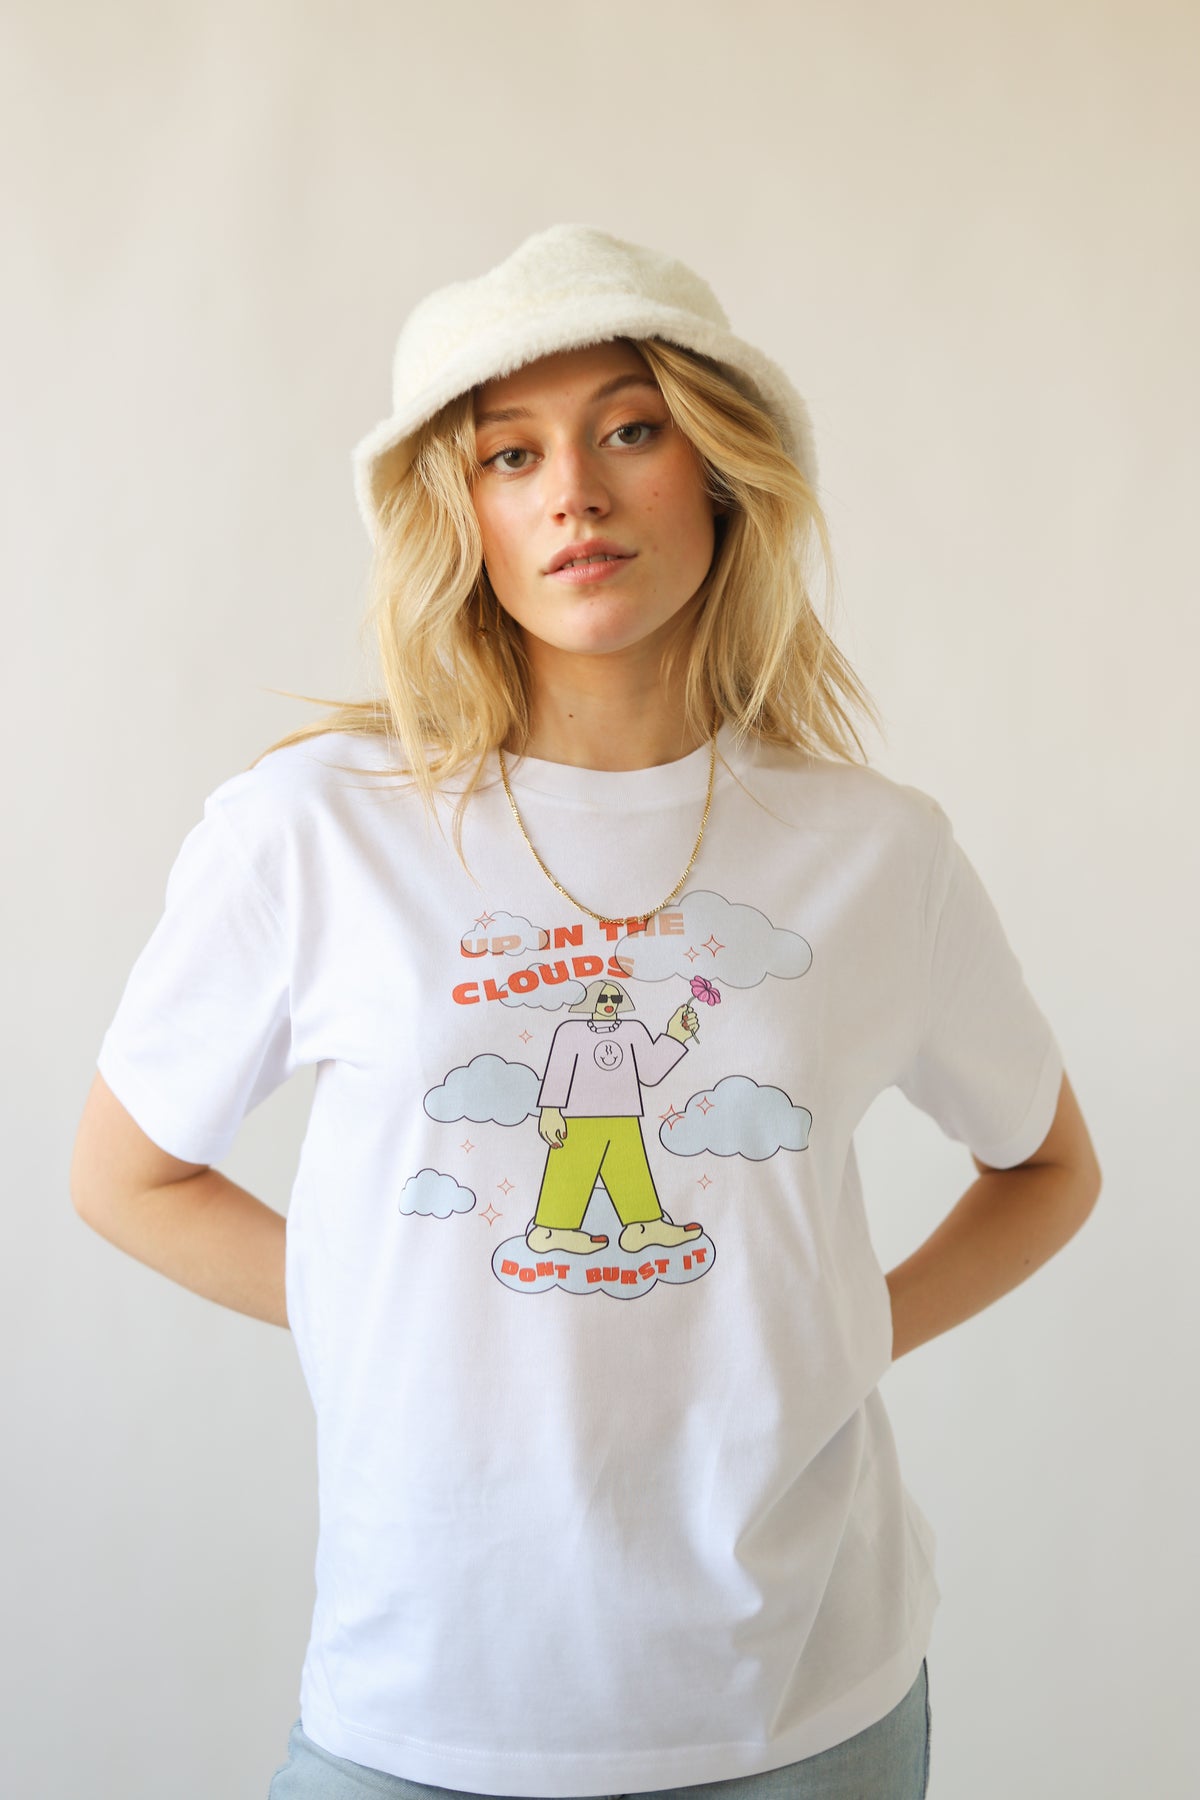 Up in the Clouds - Unisex Organic Cotton T-Shirt